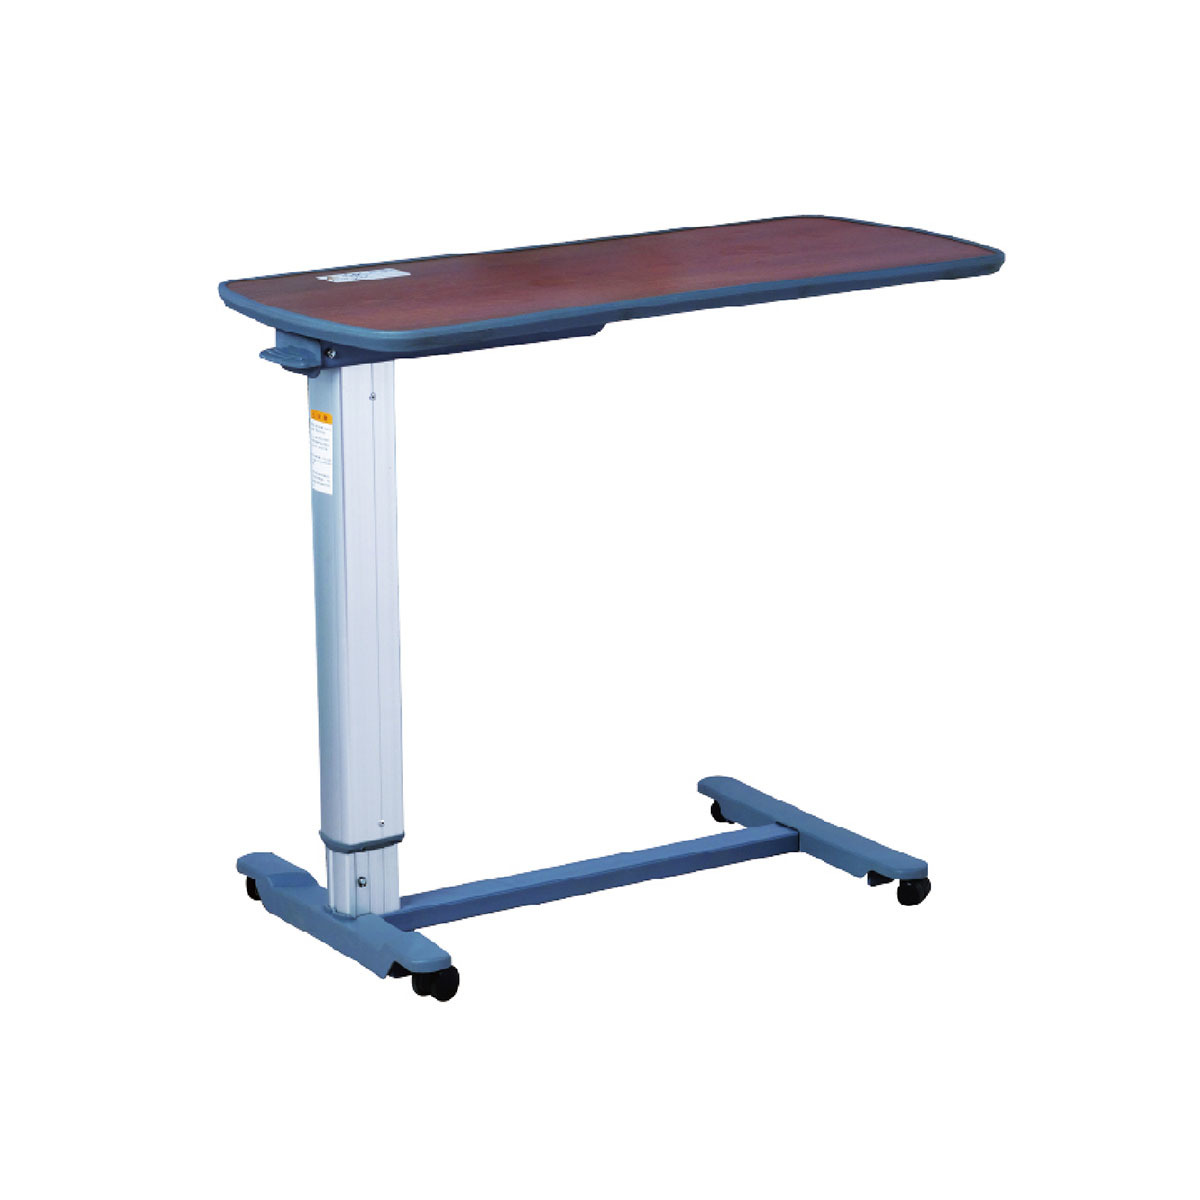 HL-D611C Over bed table